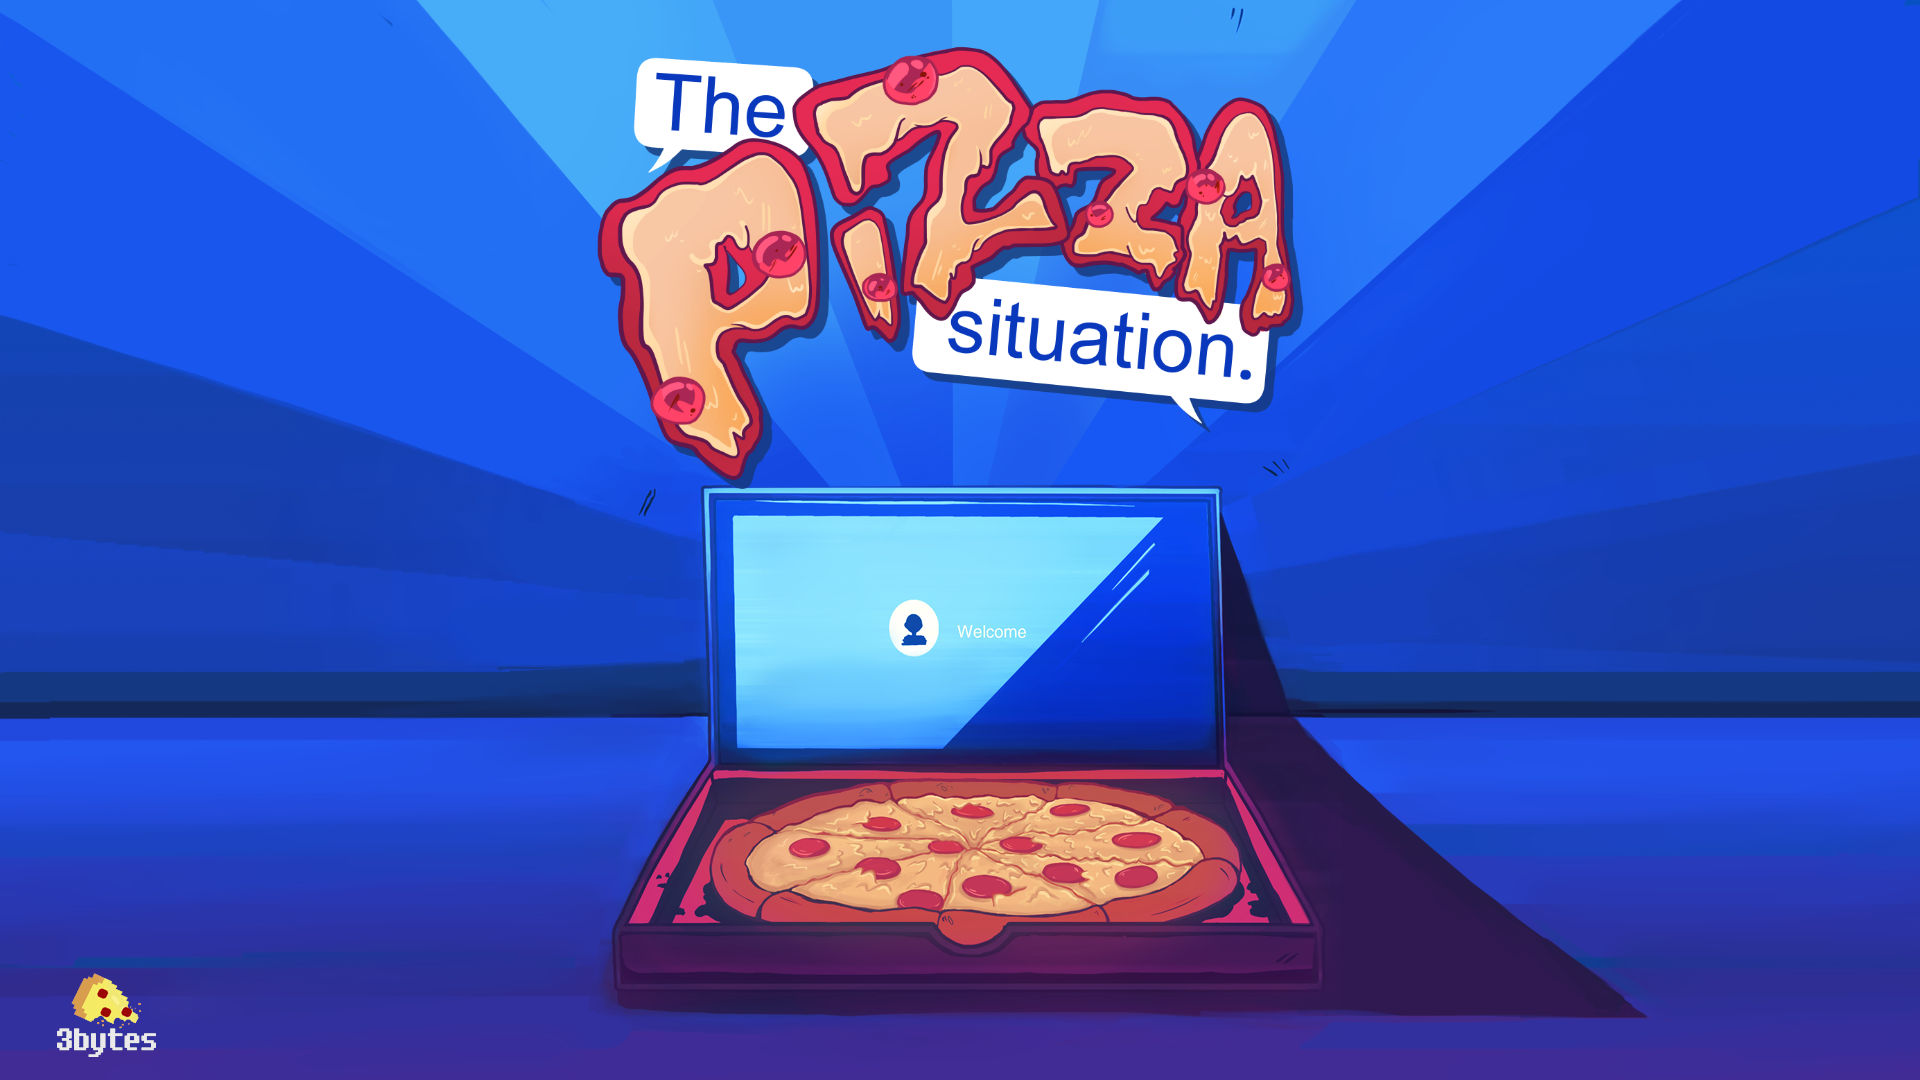 ThePizzaSituation_Beckground_1.png